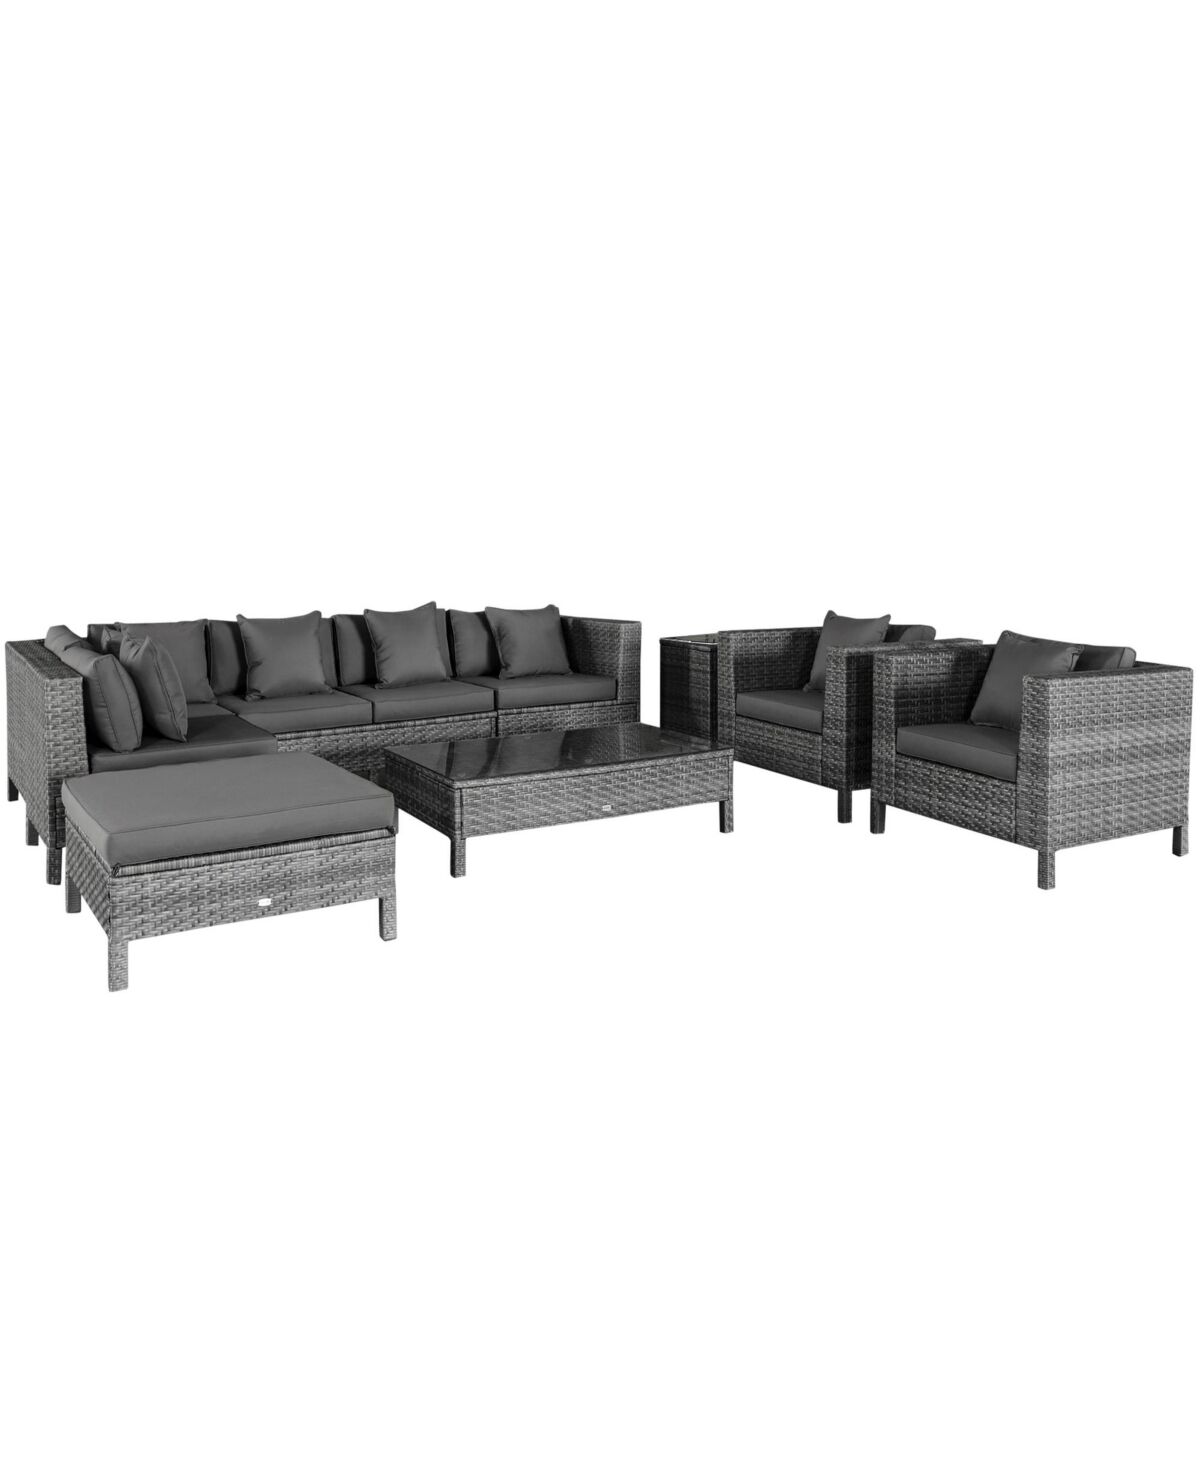 Outsunny 9-Piece Patio Furniture Sets Outdoor Conversation Sets, Sofa Sets with Removable Cushion, Footstool and Coffee table for Balcony, Backyard, B